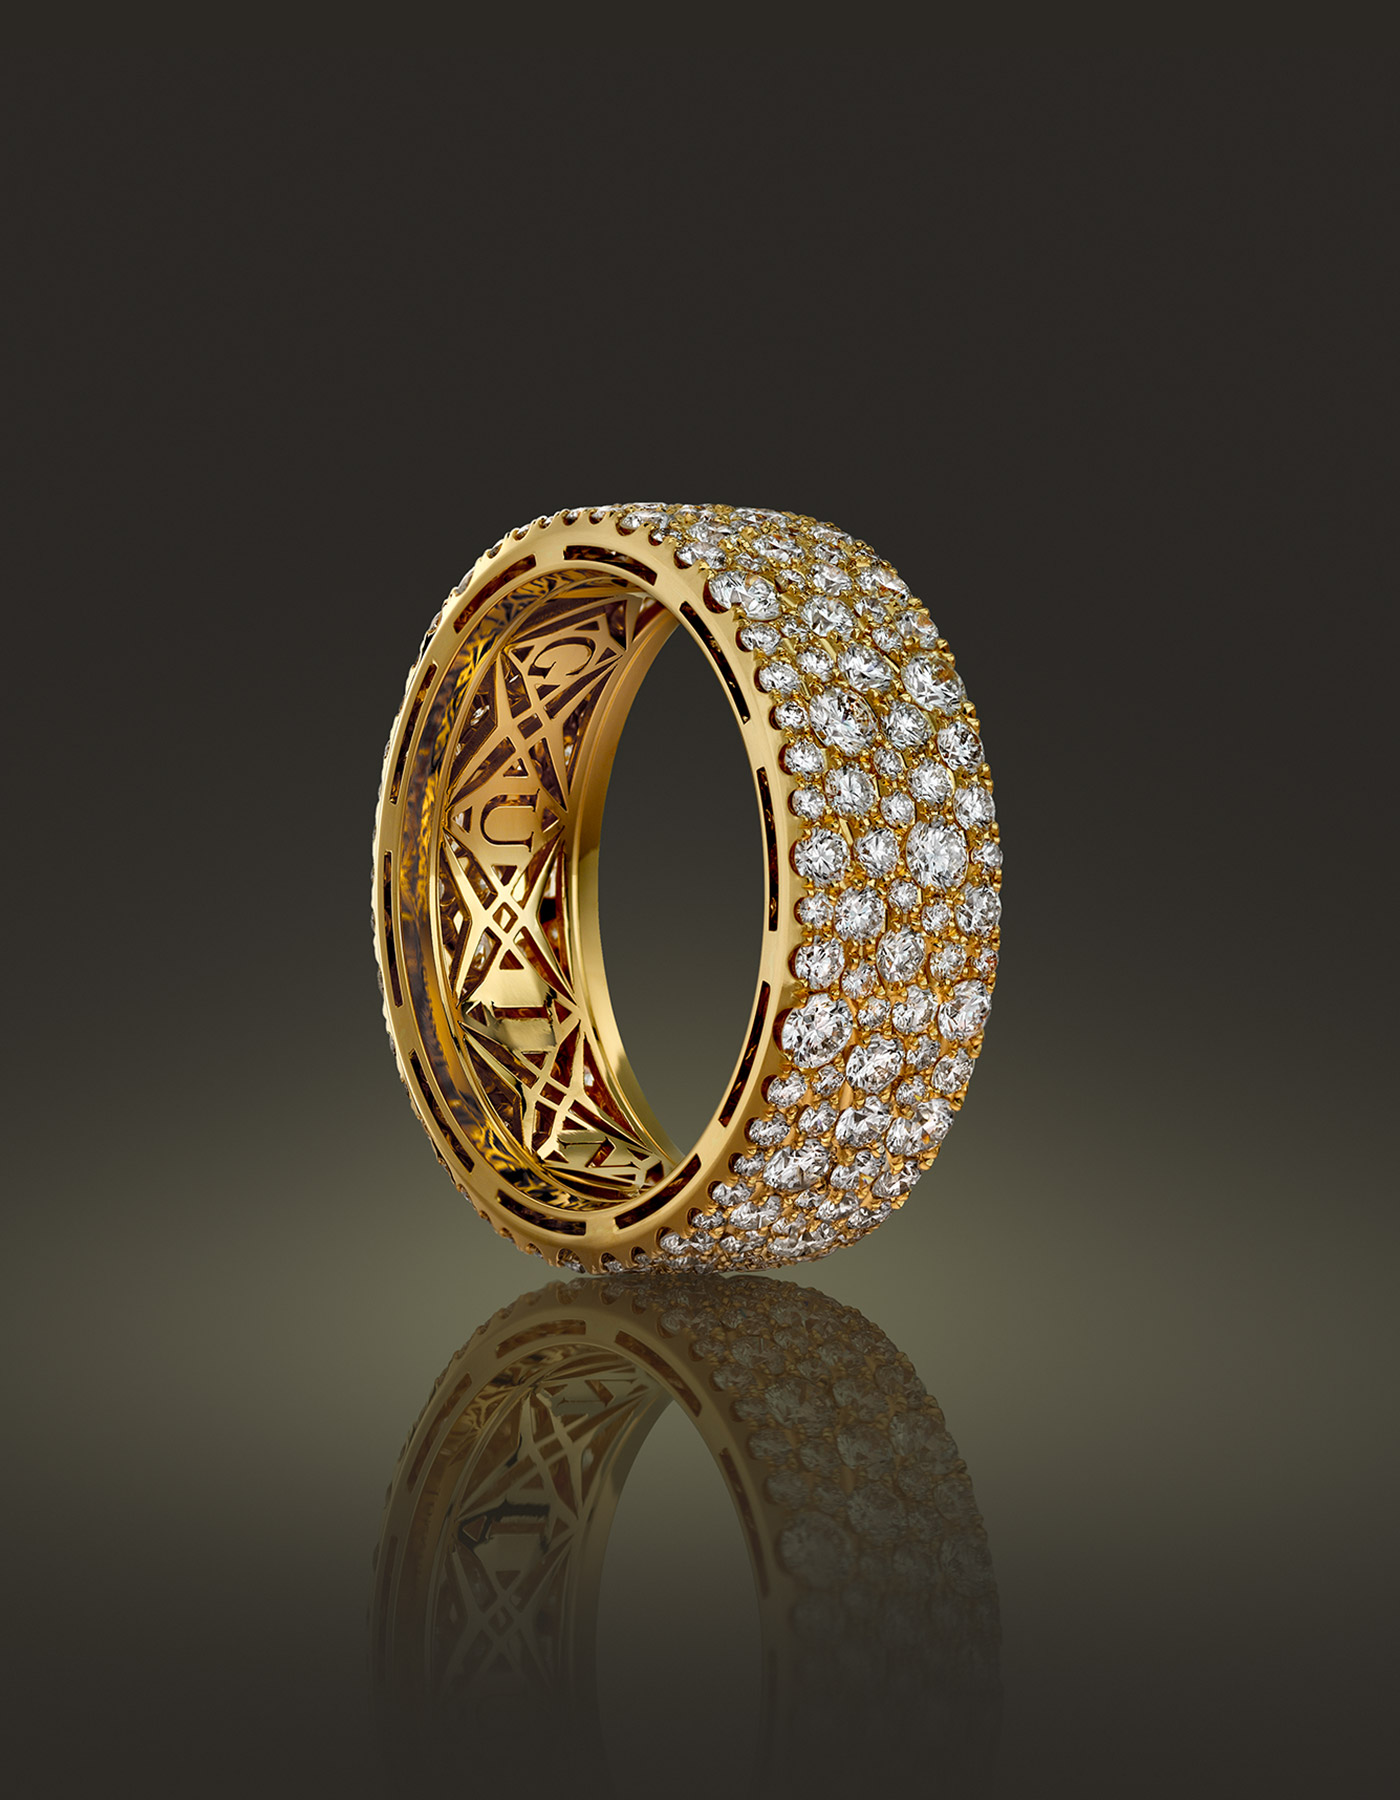 Guinnot Anonymous Snowset diamond ring in 18k yellow gold